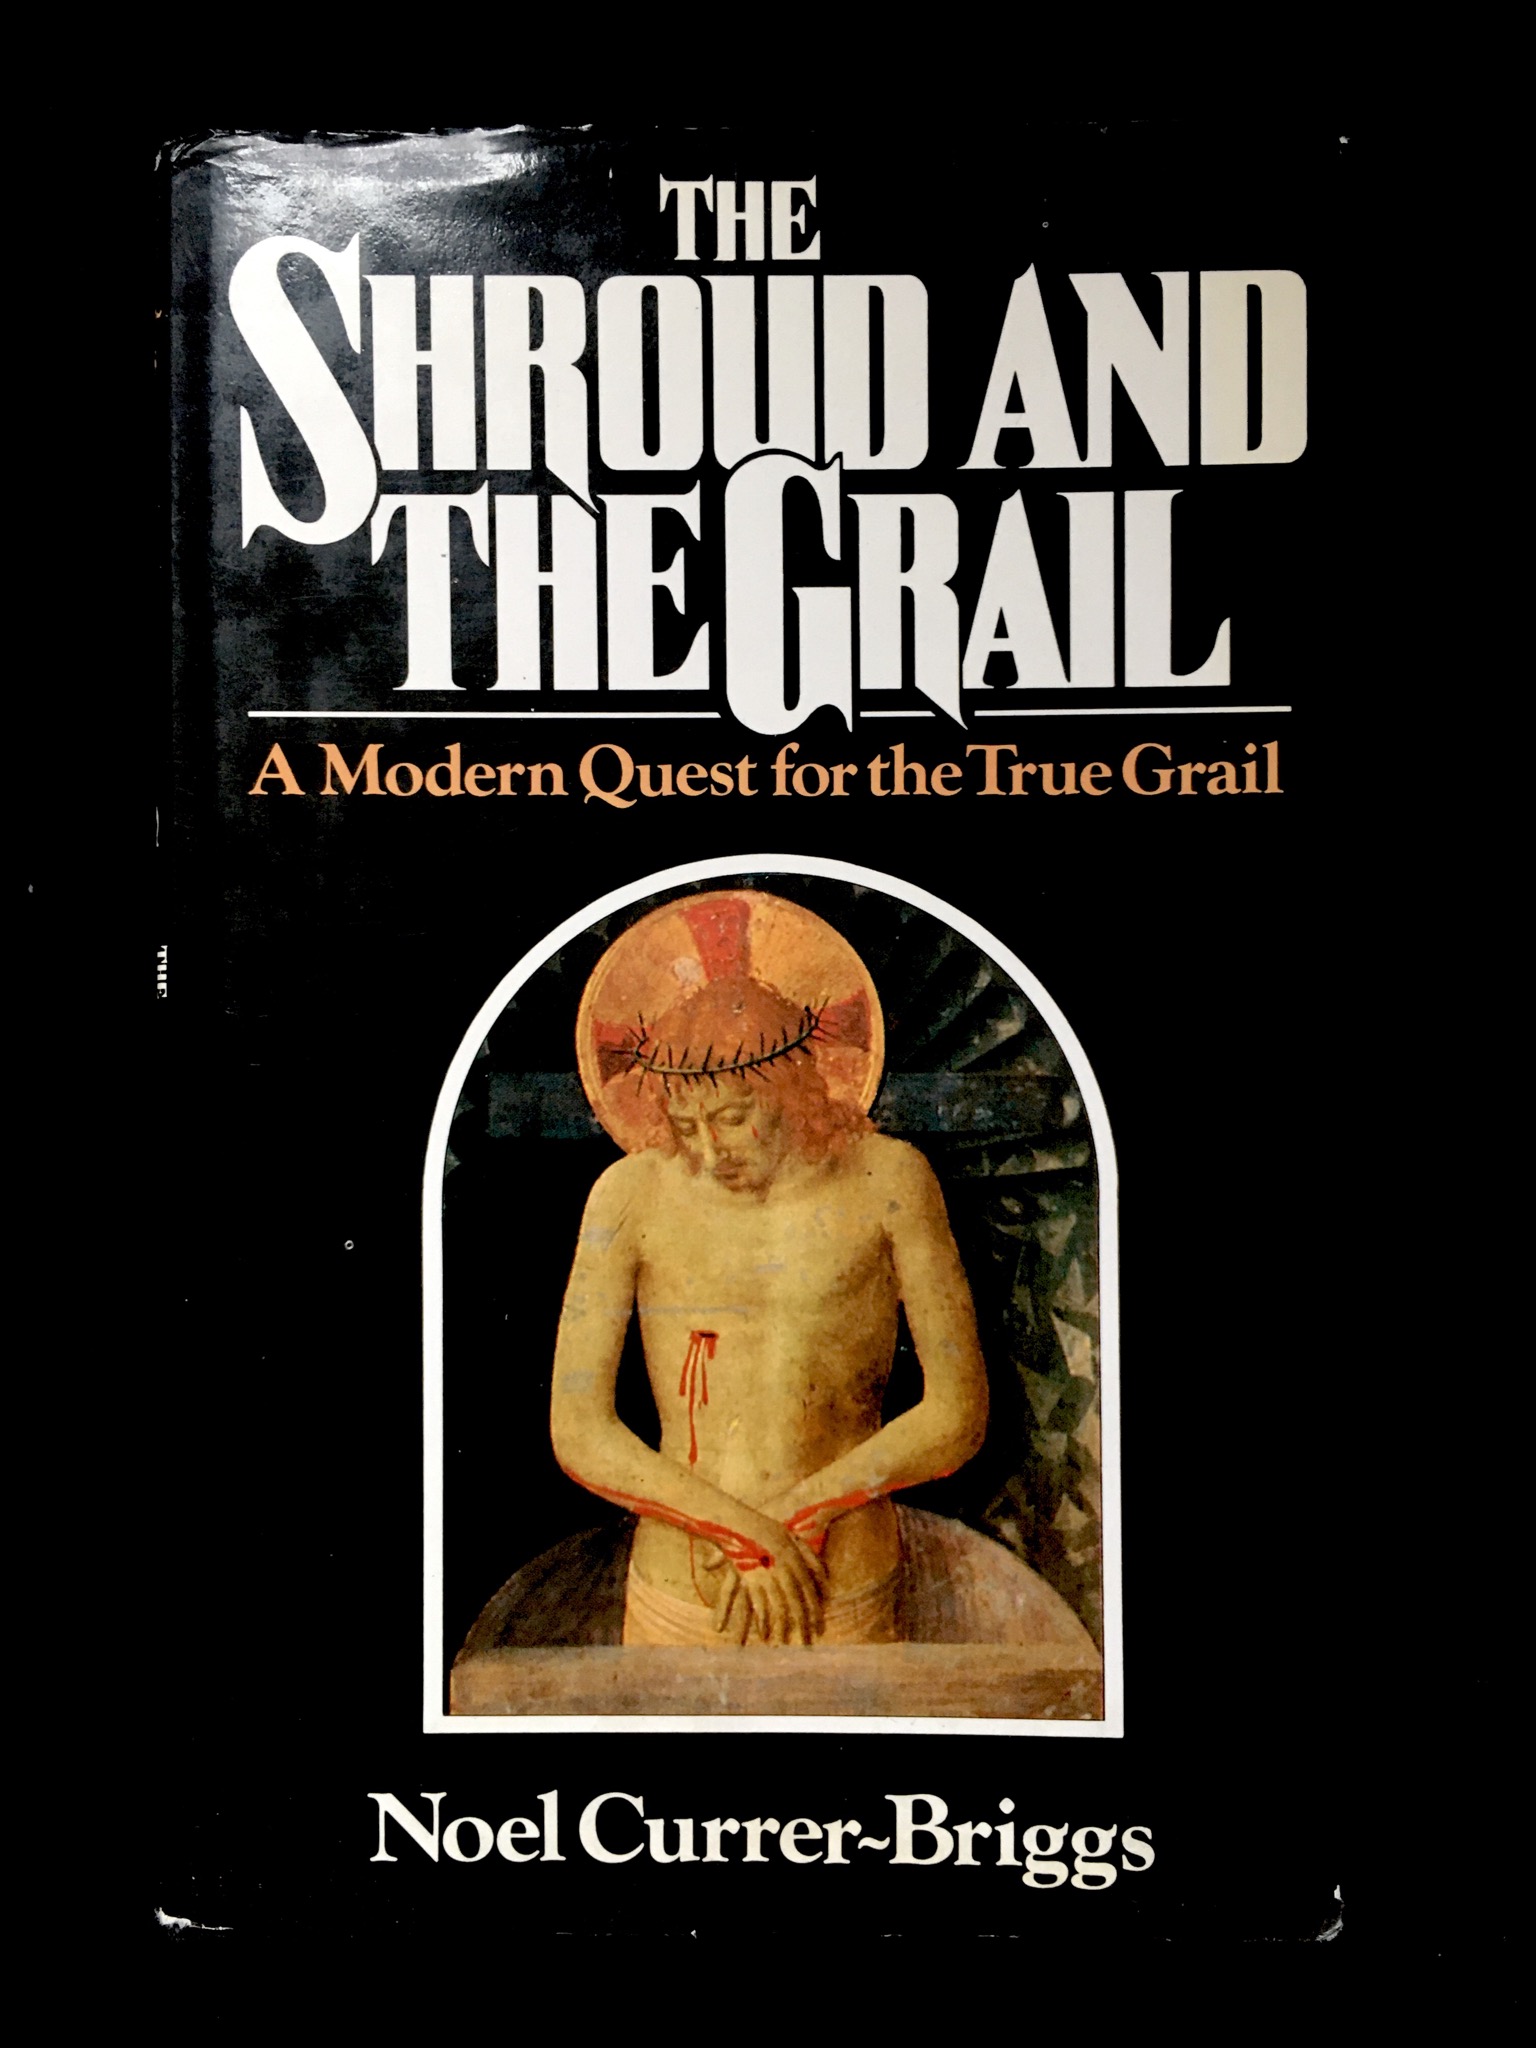 The Shroud And The Grail by Noel Currer-Briggs